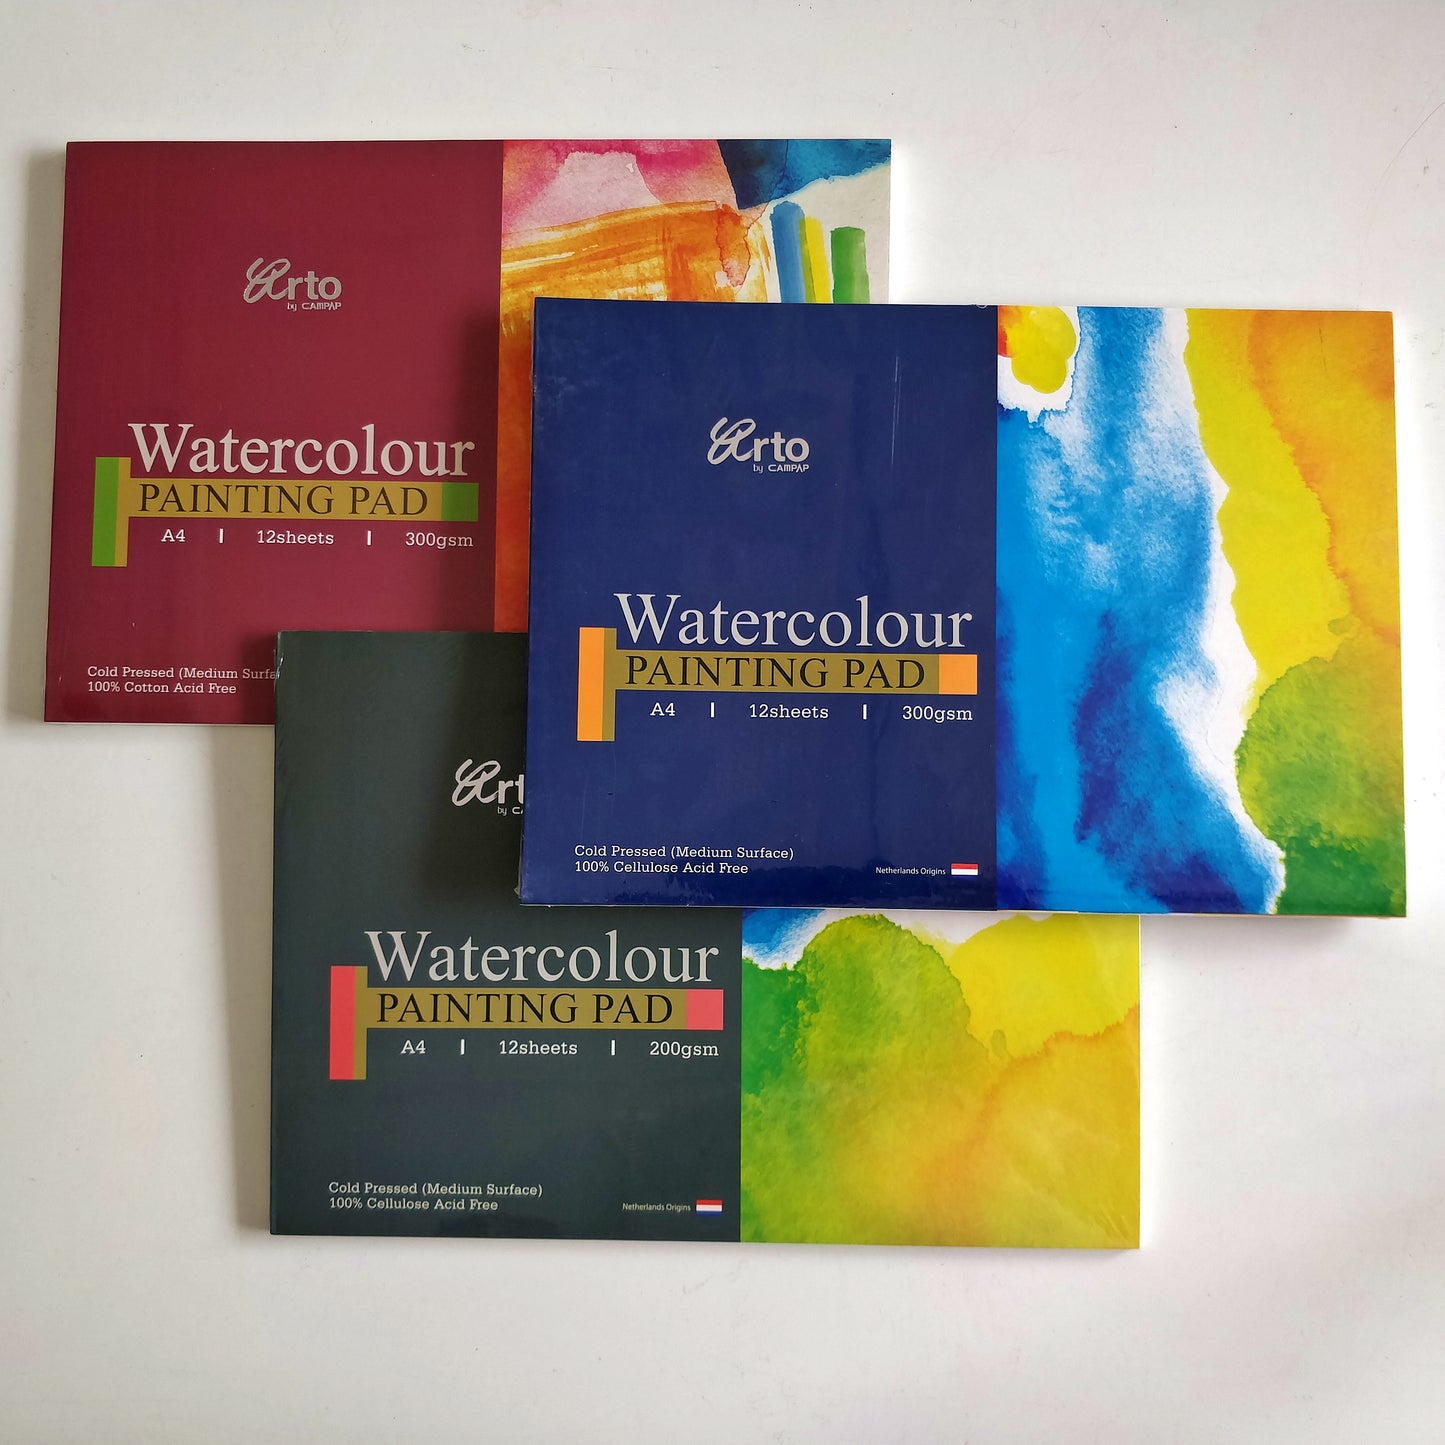 Arto by Campap Watercolor Painting Pad - B4 300 gsm